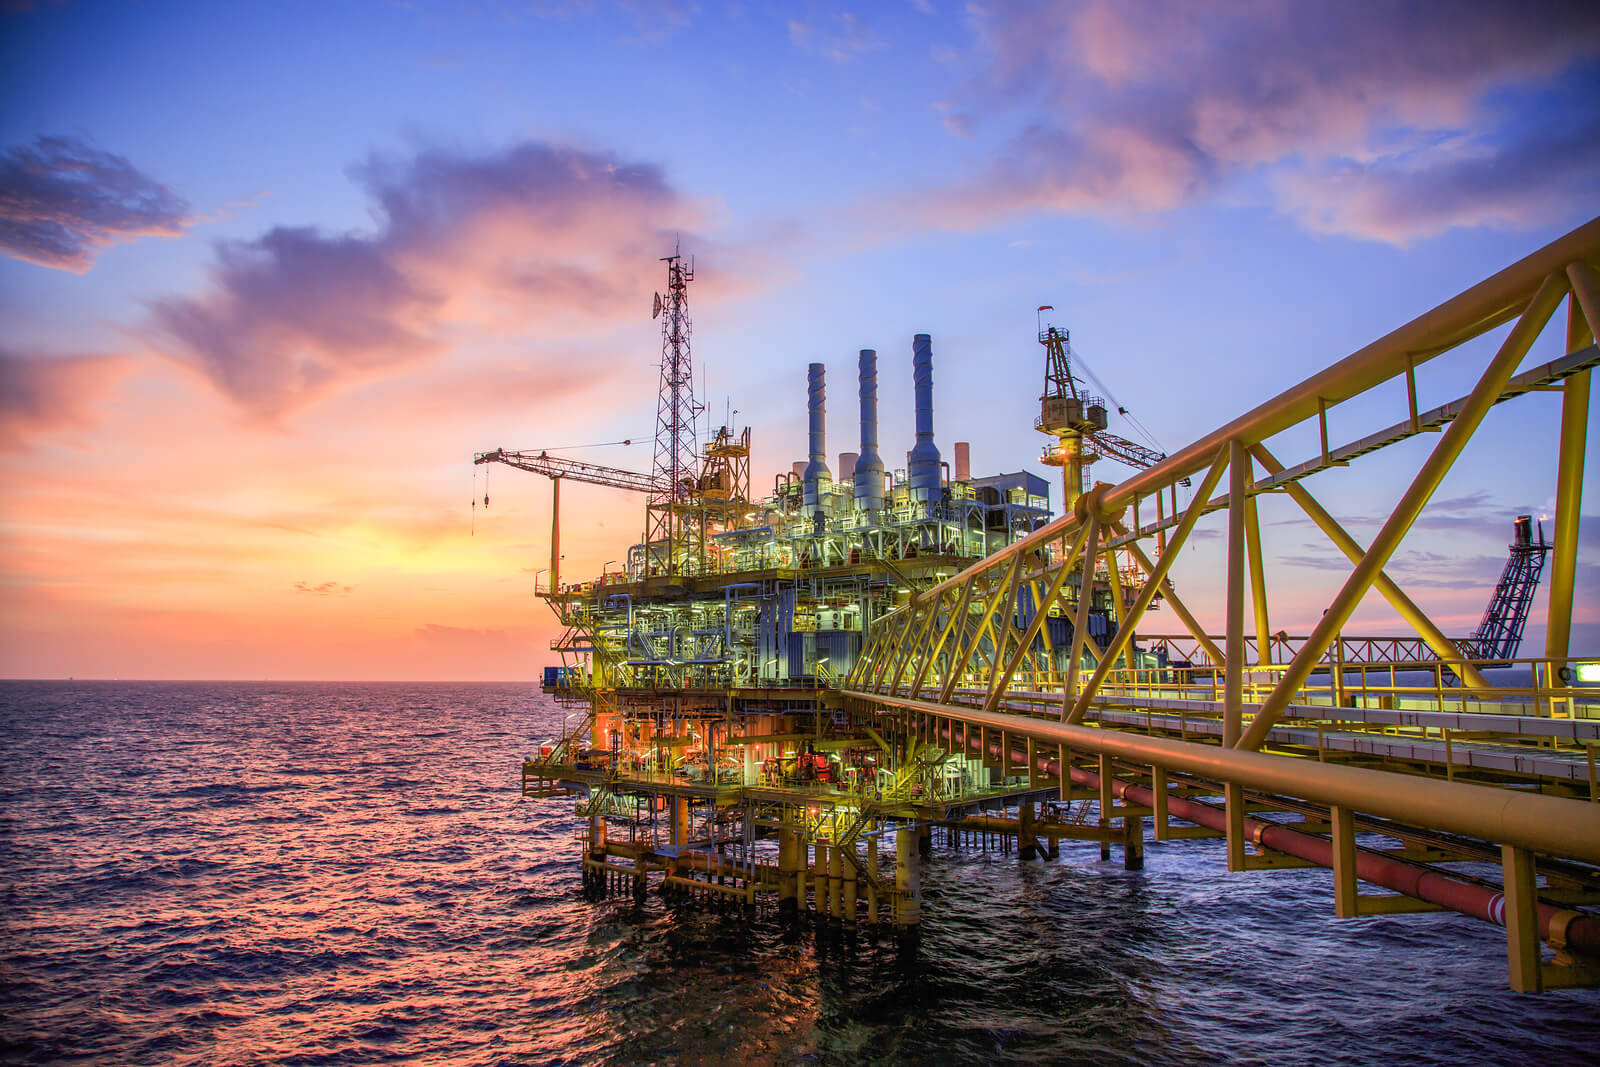 Oil and gas platform or Construction platform in the gulf or the